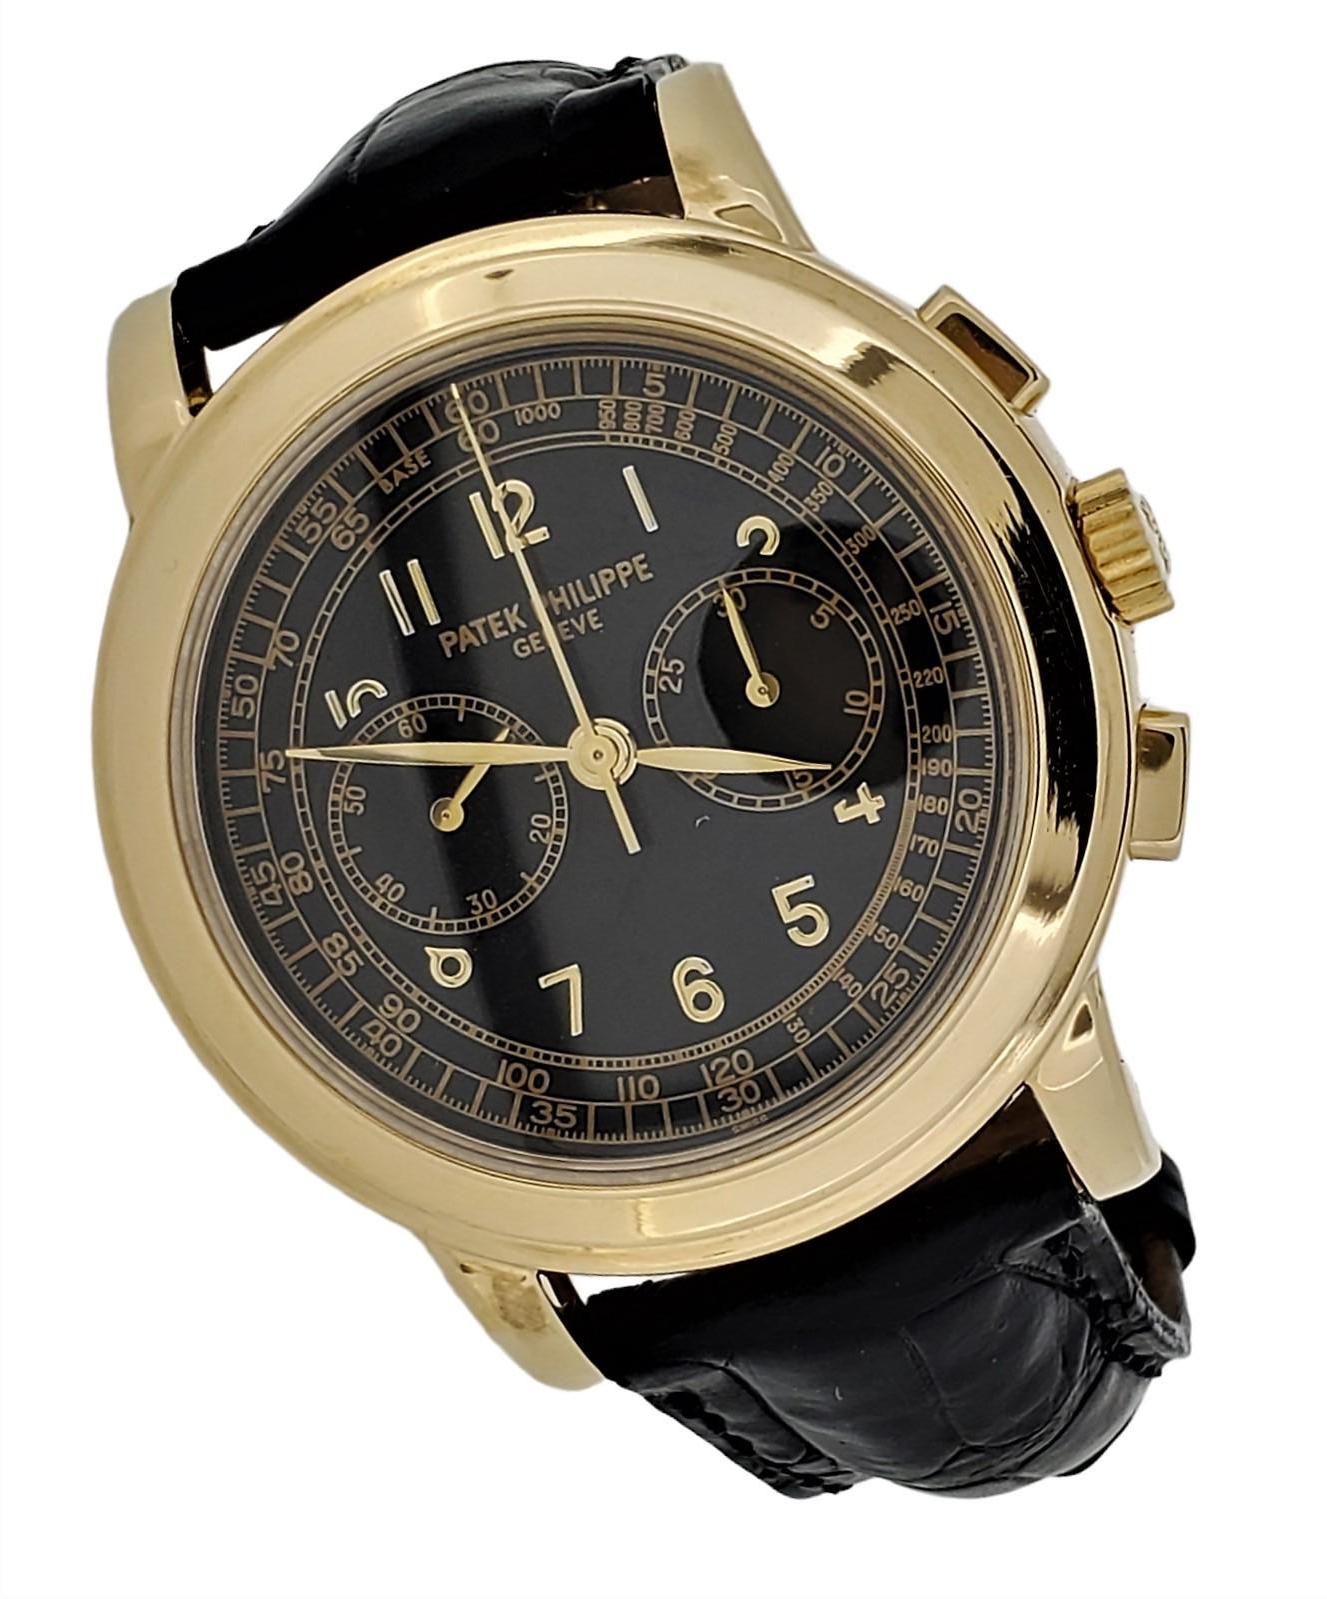 Patek Philippe 5070J Chronograph Watch Yellow gold 42 mm Case Circa 2000 In Excellent Condition For Sale In Santa Monica, CA